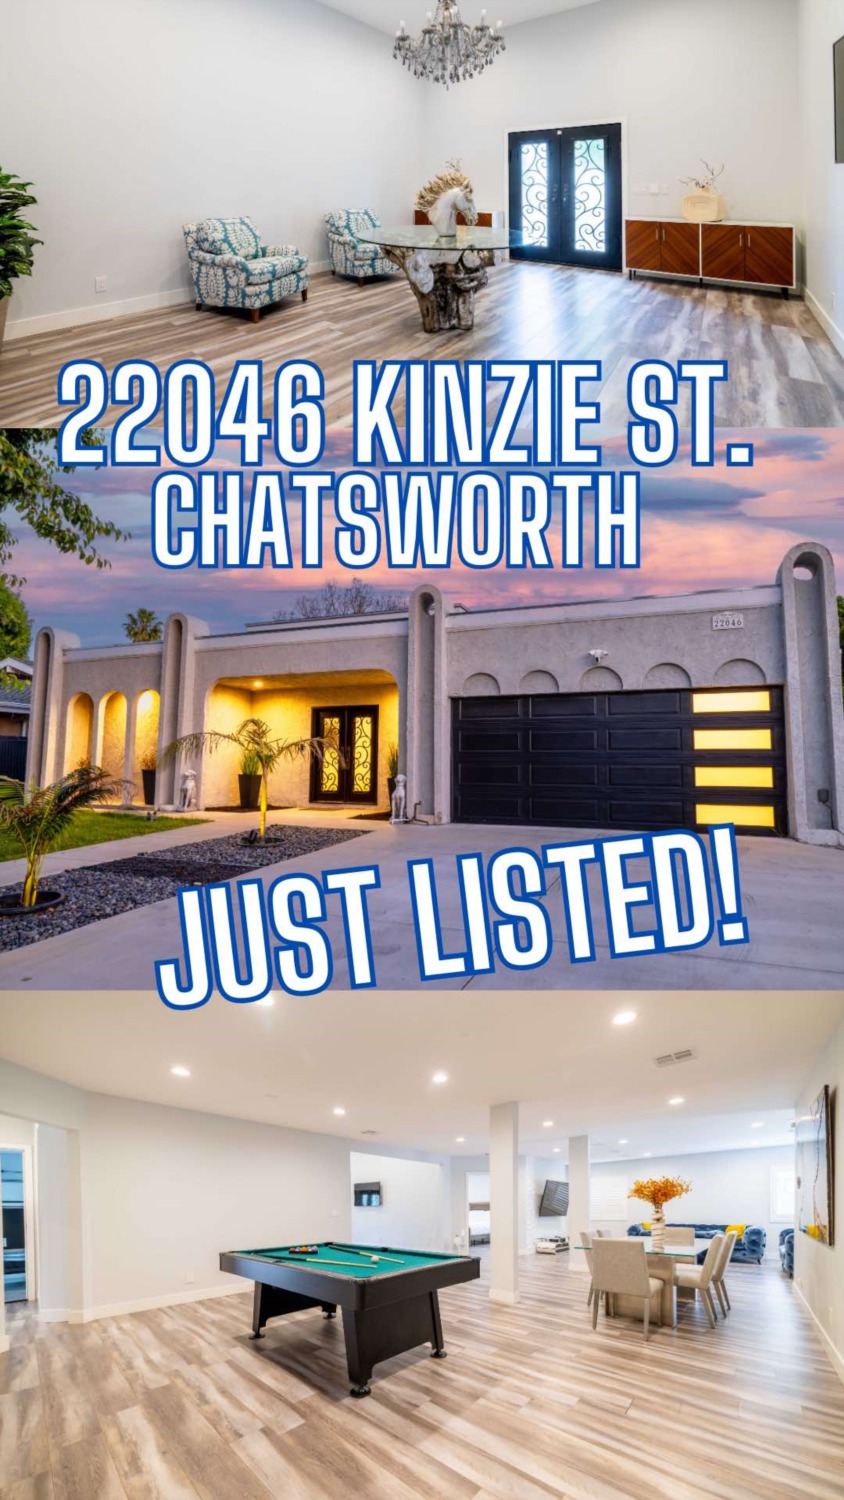 The Kinzie Forum Is Officially In Escrow 22046 Kinzie St Chatsworth While The Good News Of